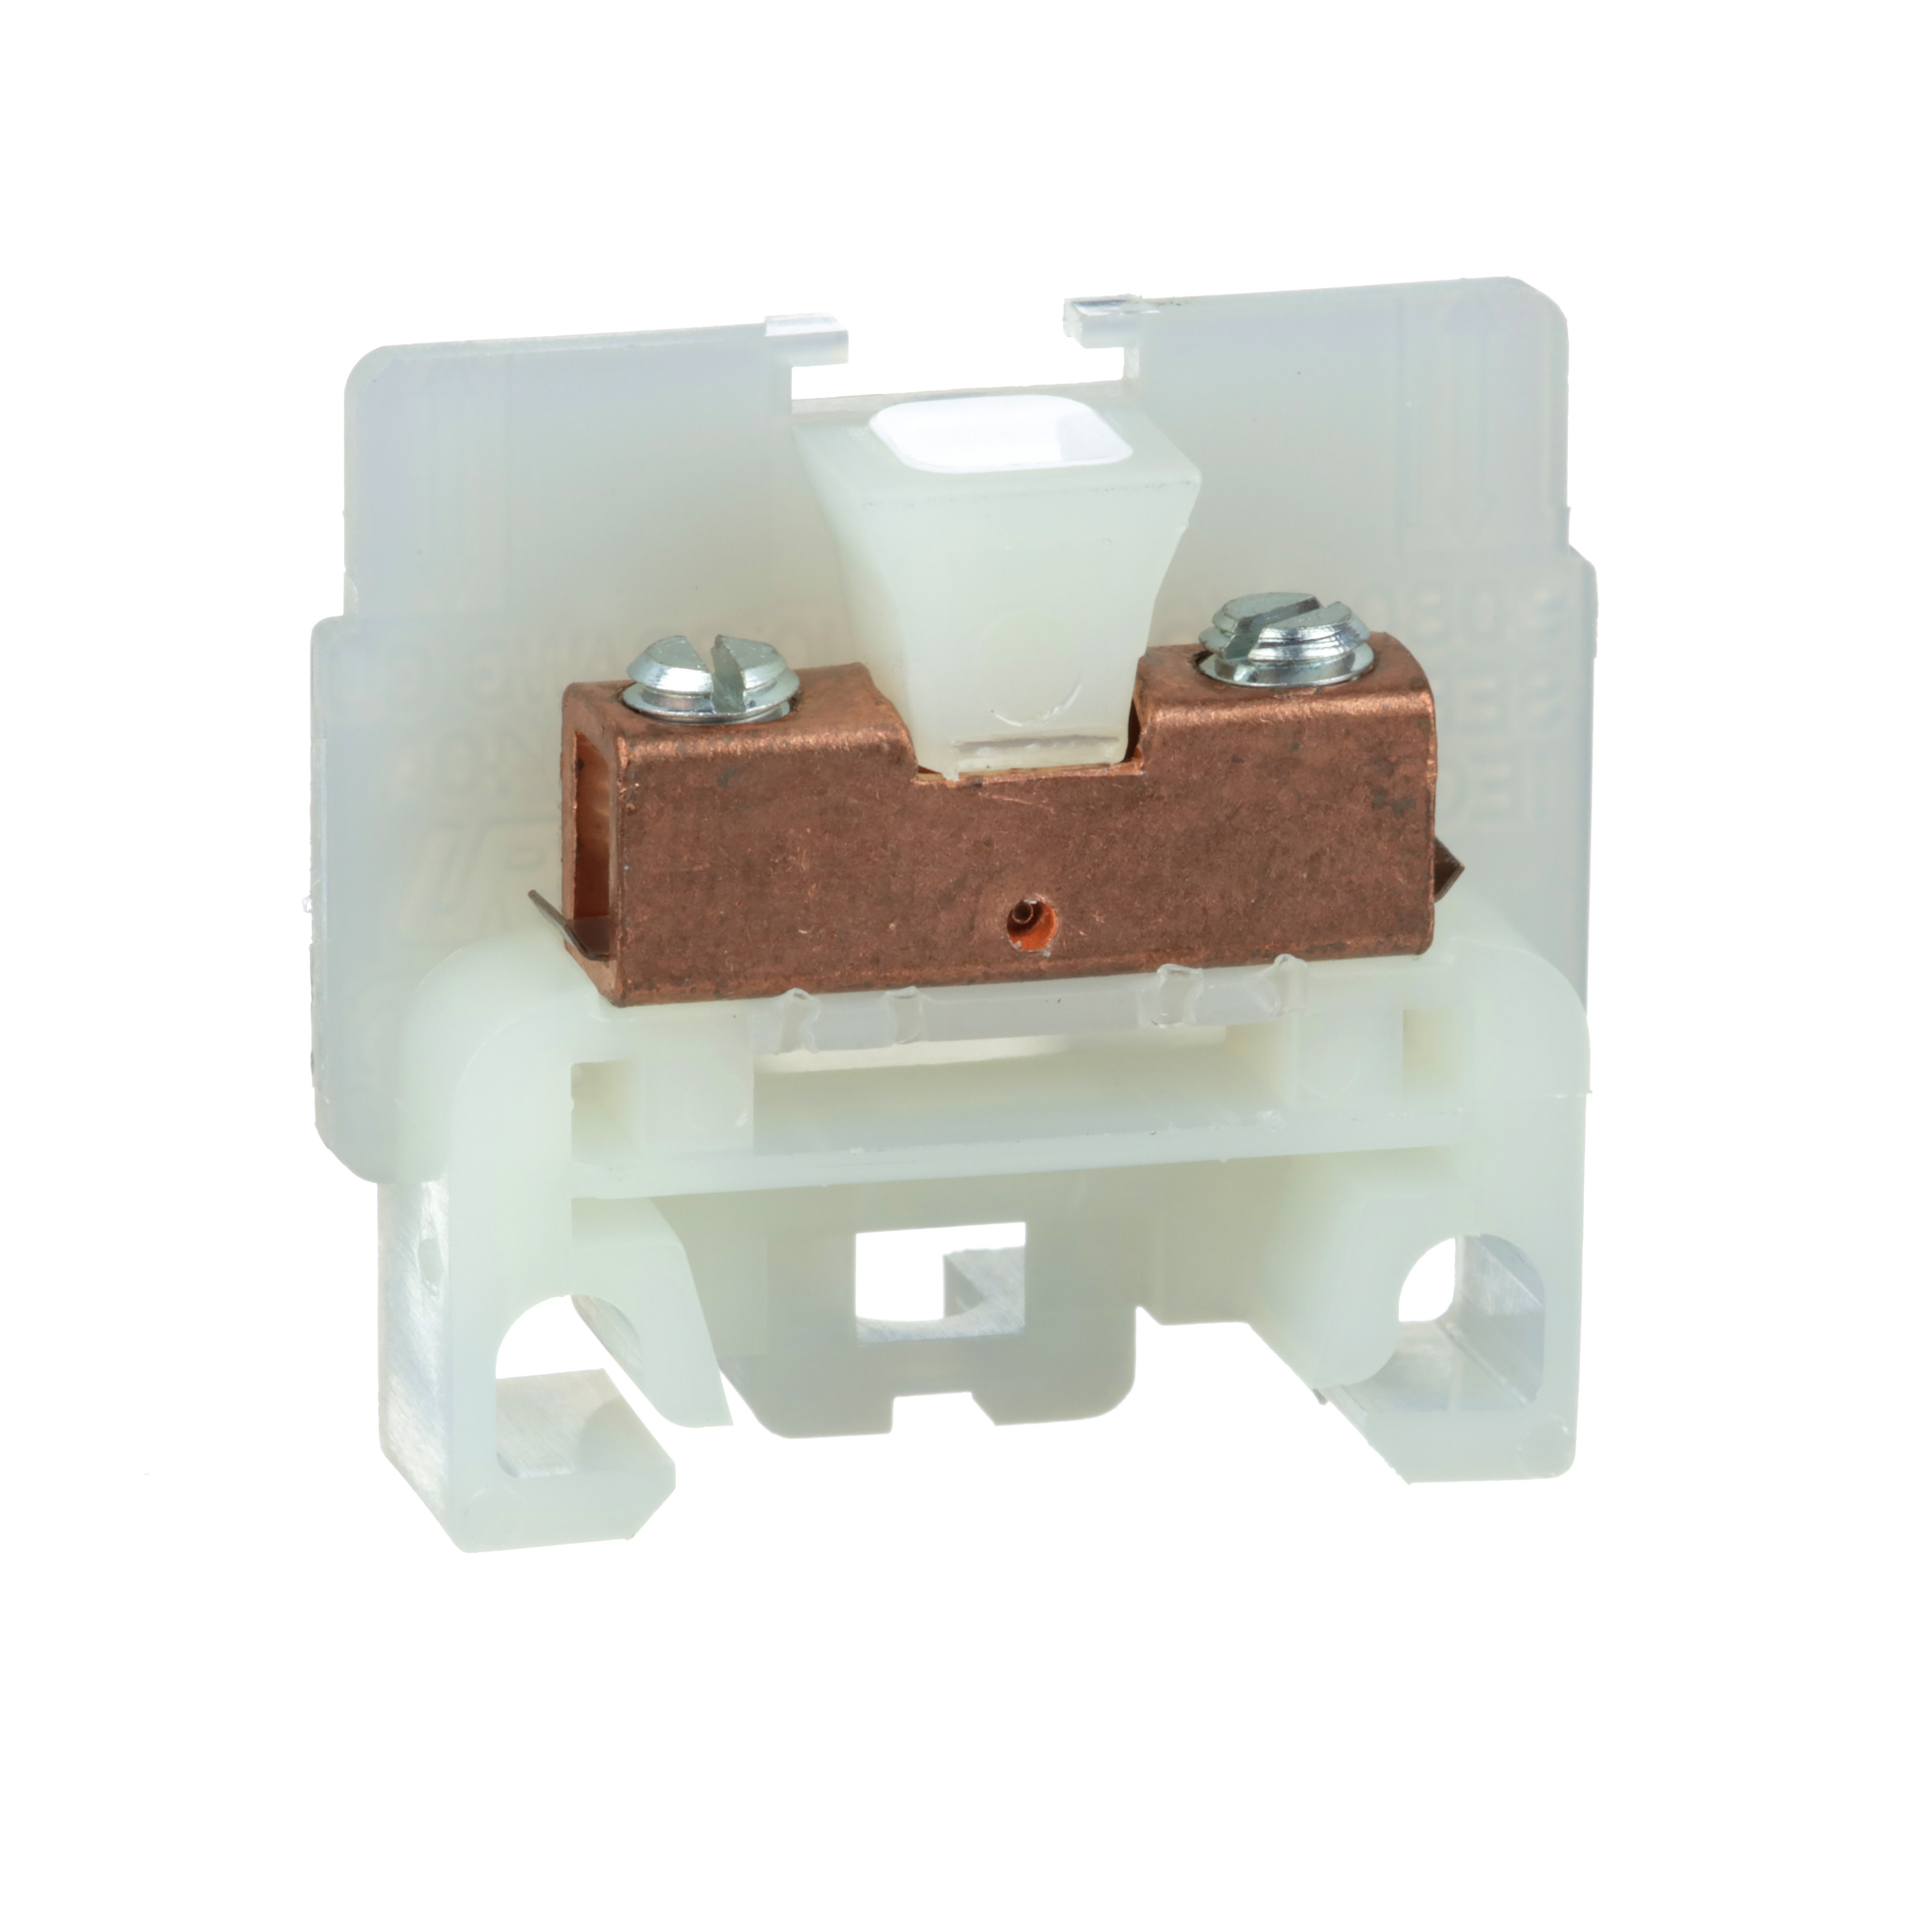 Terminal block, Linergy, box connector, natural colored block, 40A, 600 V